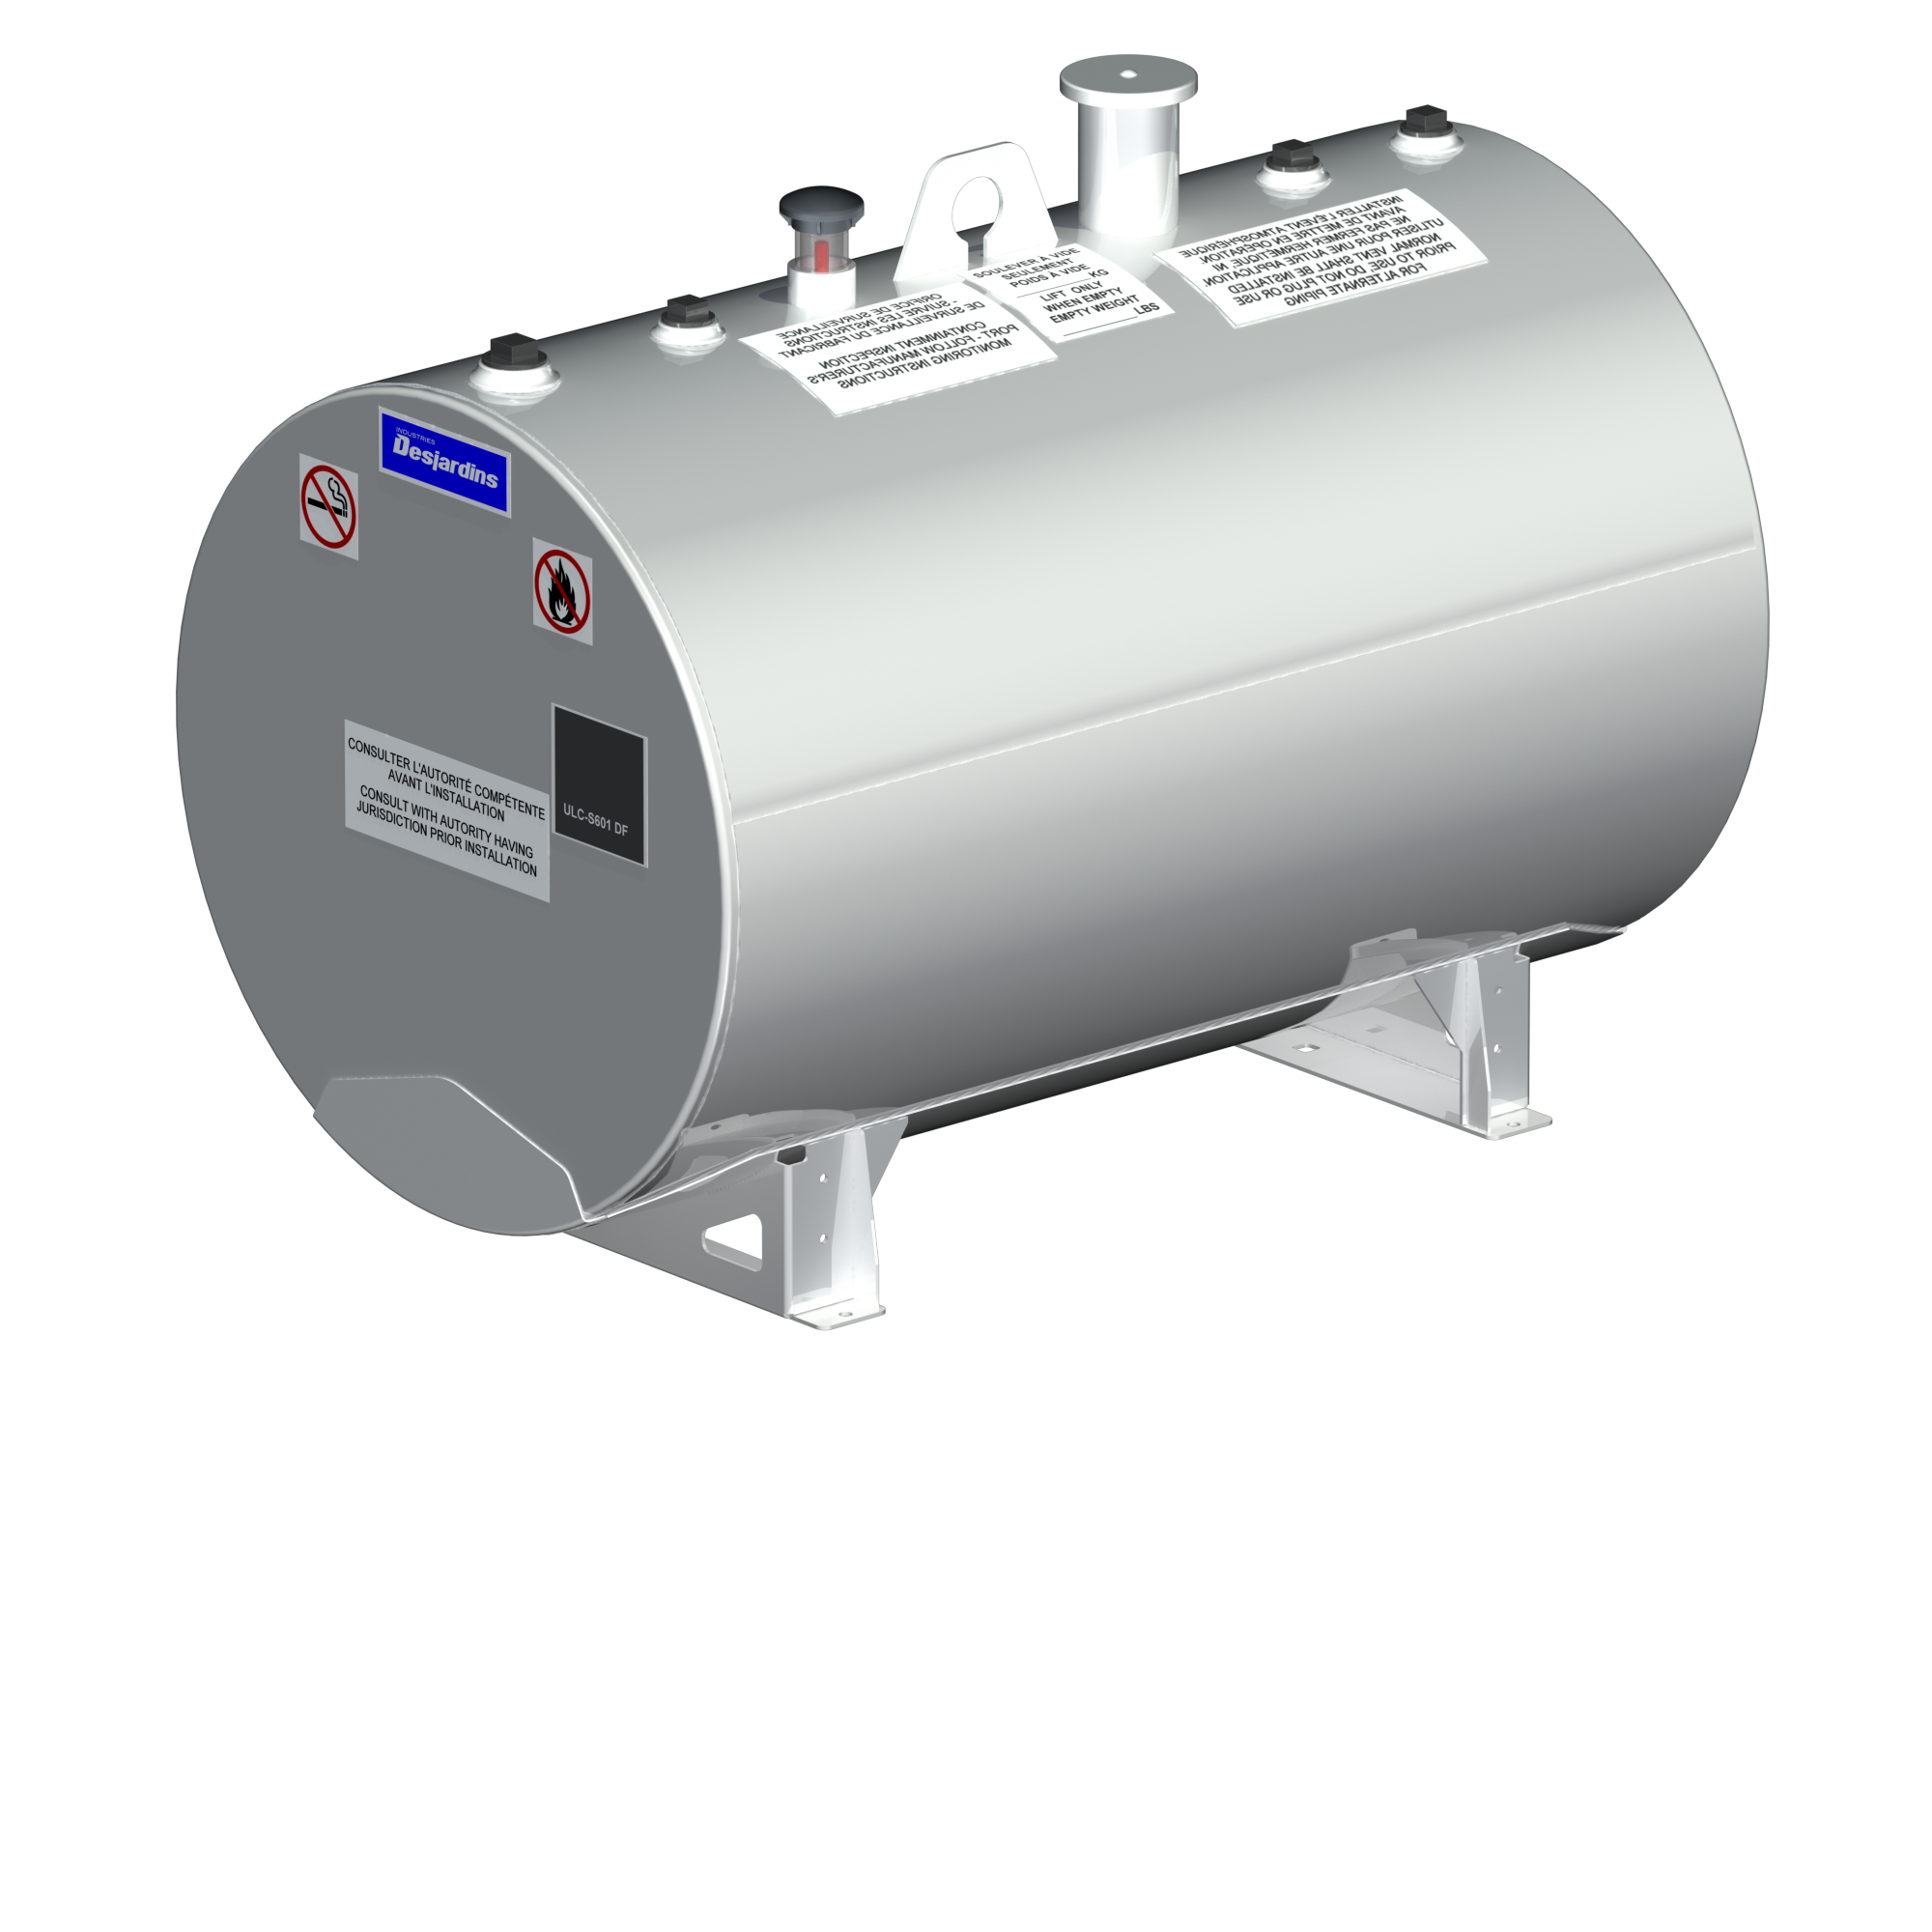 Aboveground steel utility tanks for flammable and combustible liquids